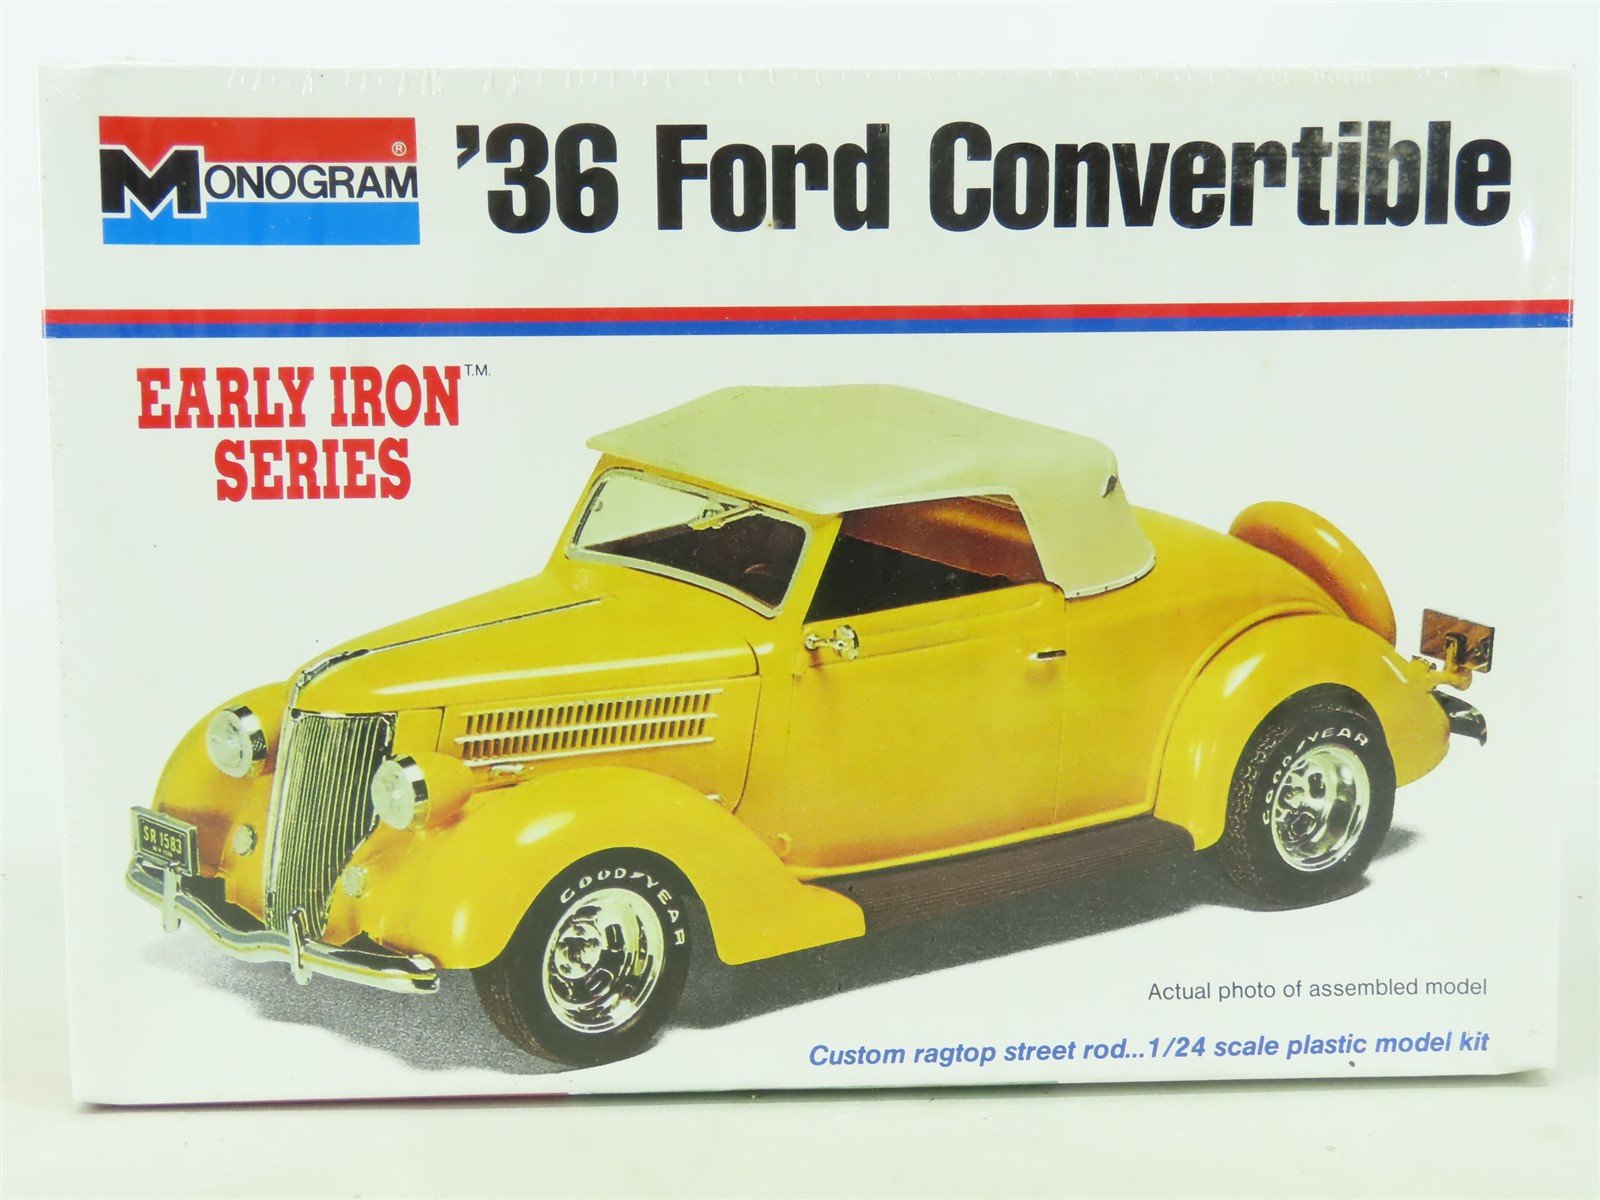 1:24 Monogram Early Iron Series Model Car Kit #7570 '36 Ford Convertible -SEALED